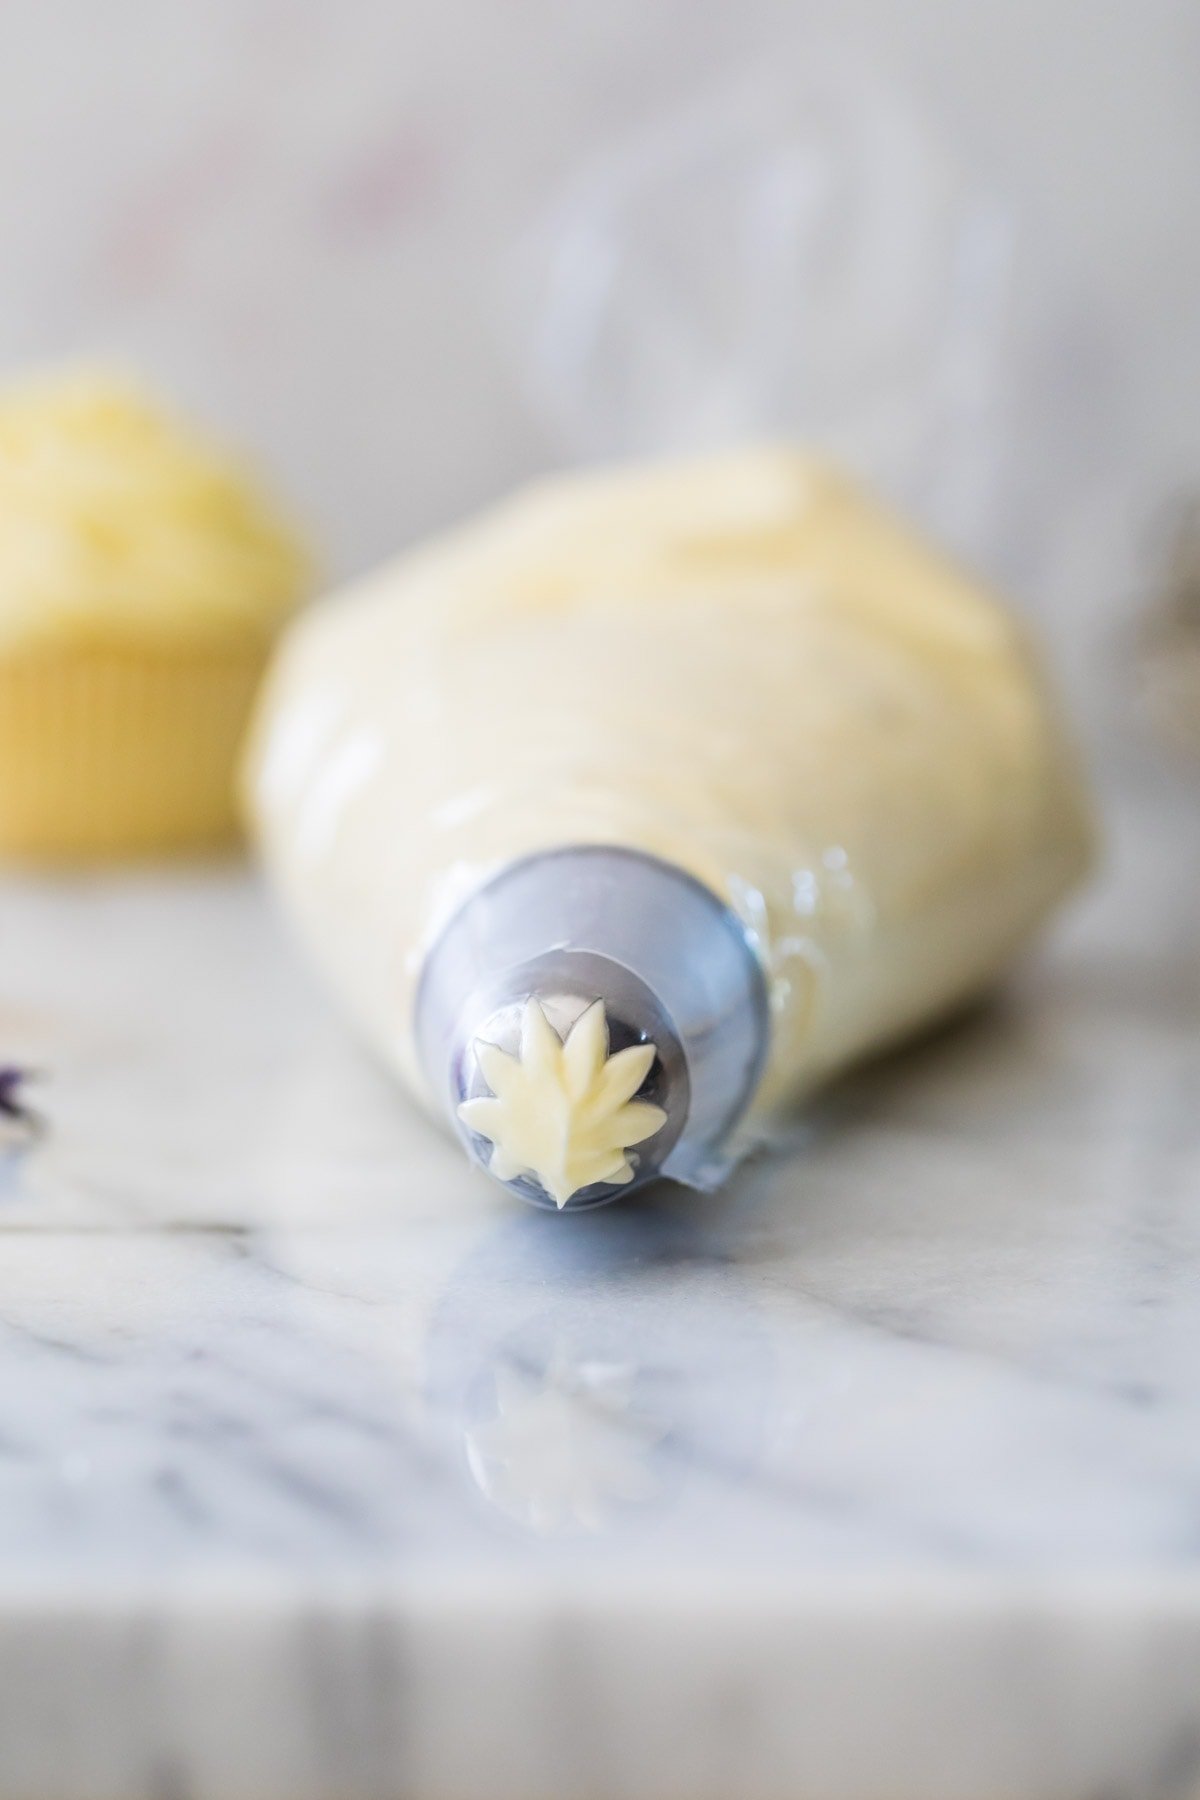 Head-on shot of star-tipped piping bag filled with German buttercream